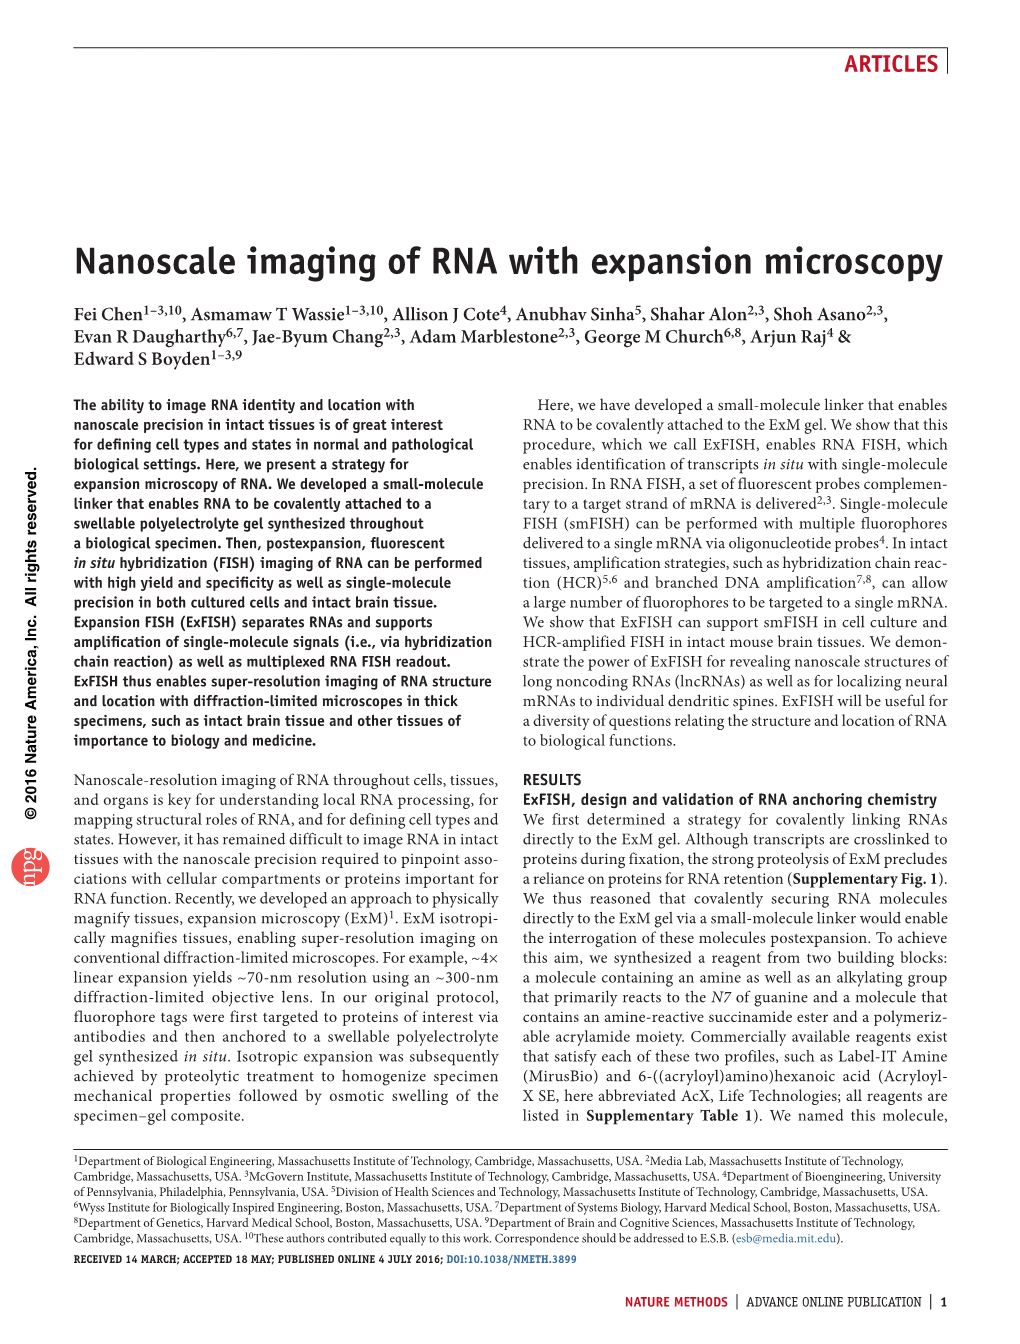 Nanoscale Imaging of RNA with Expansion Microscopy